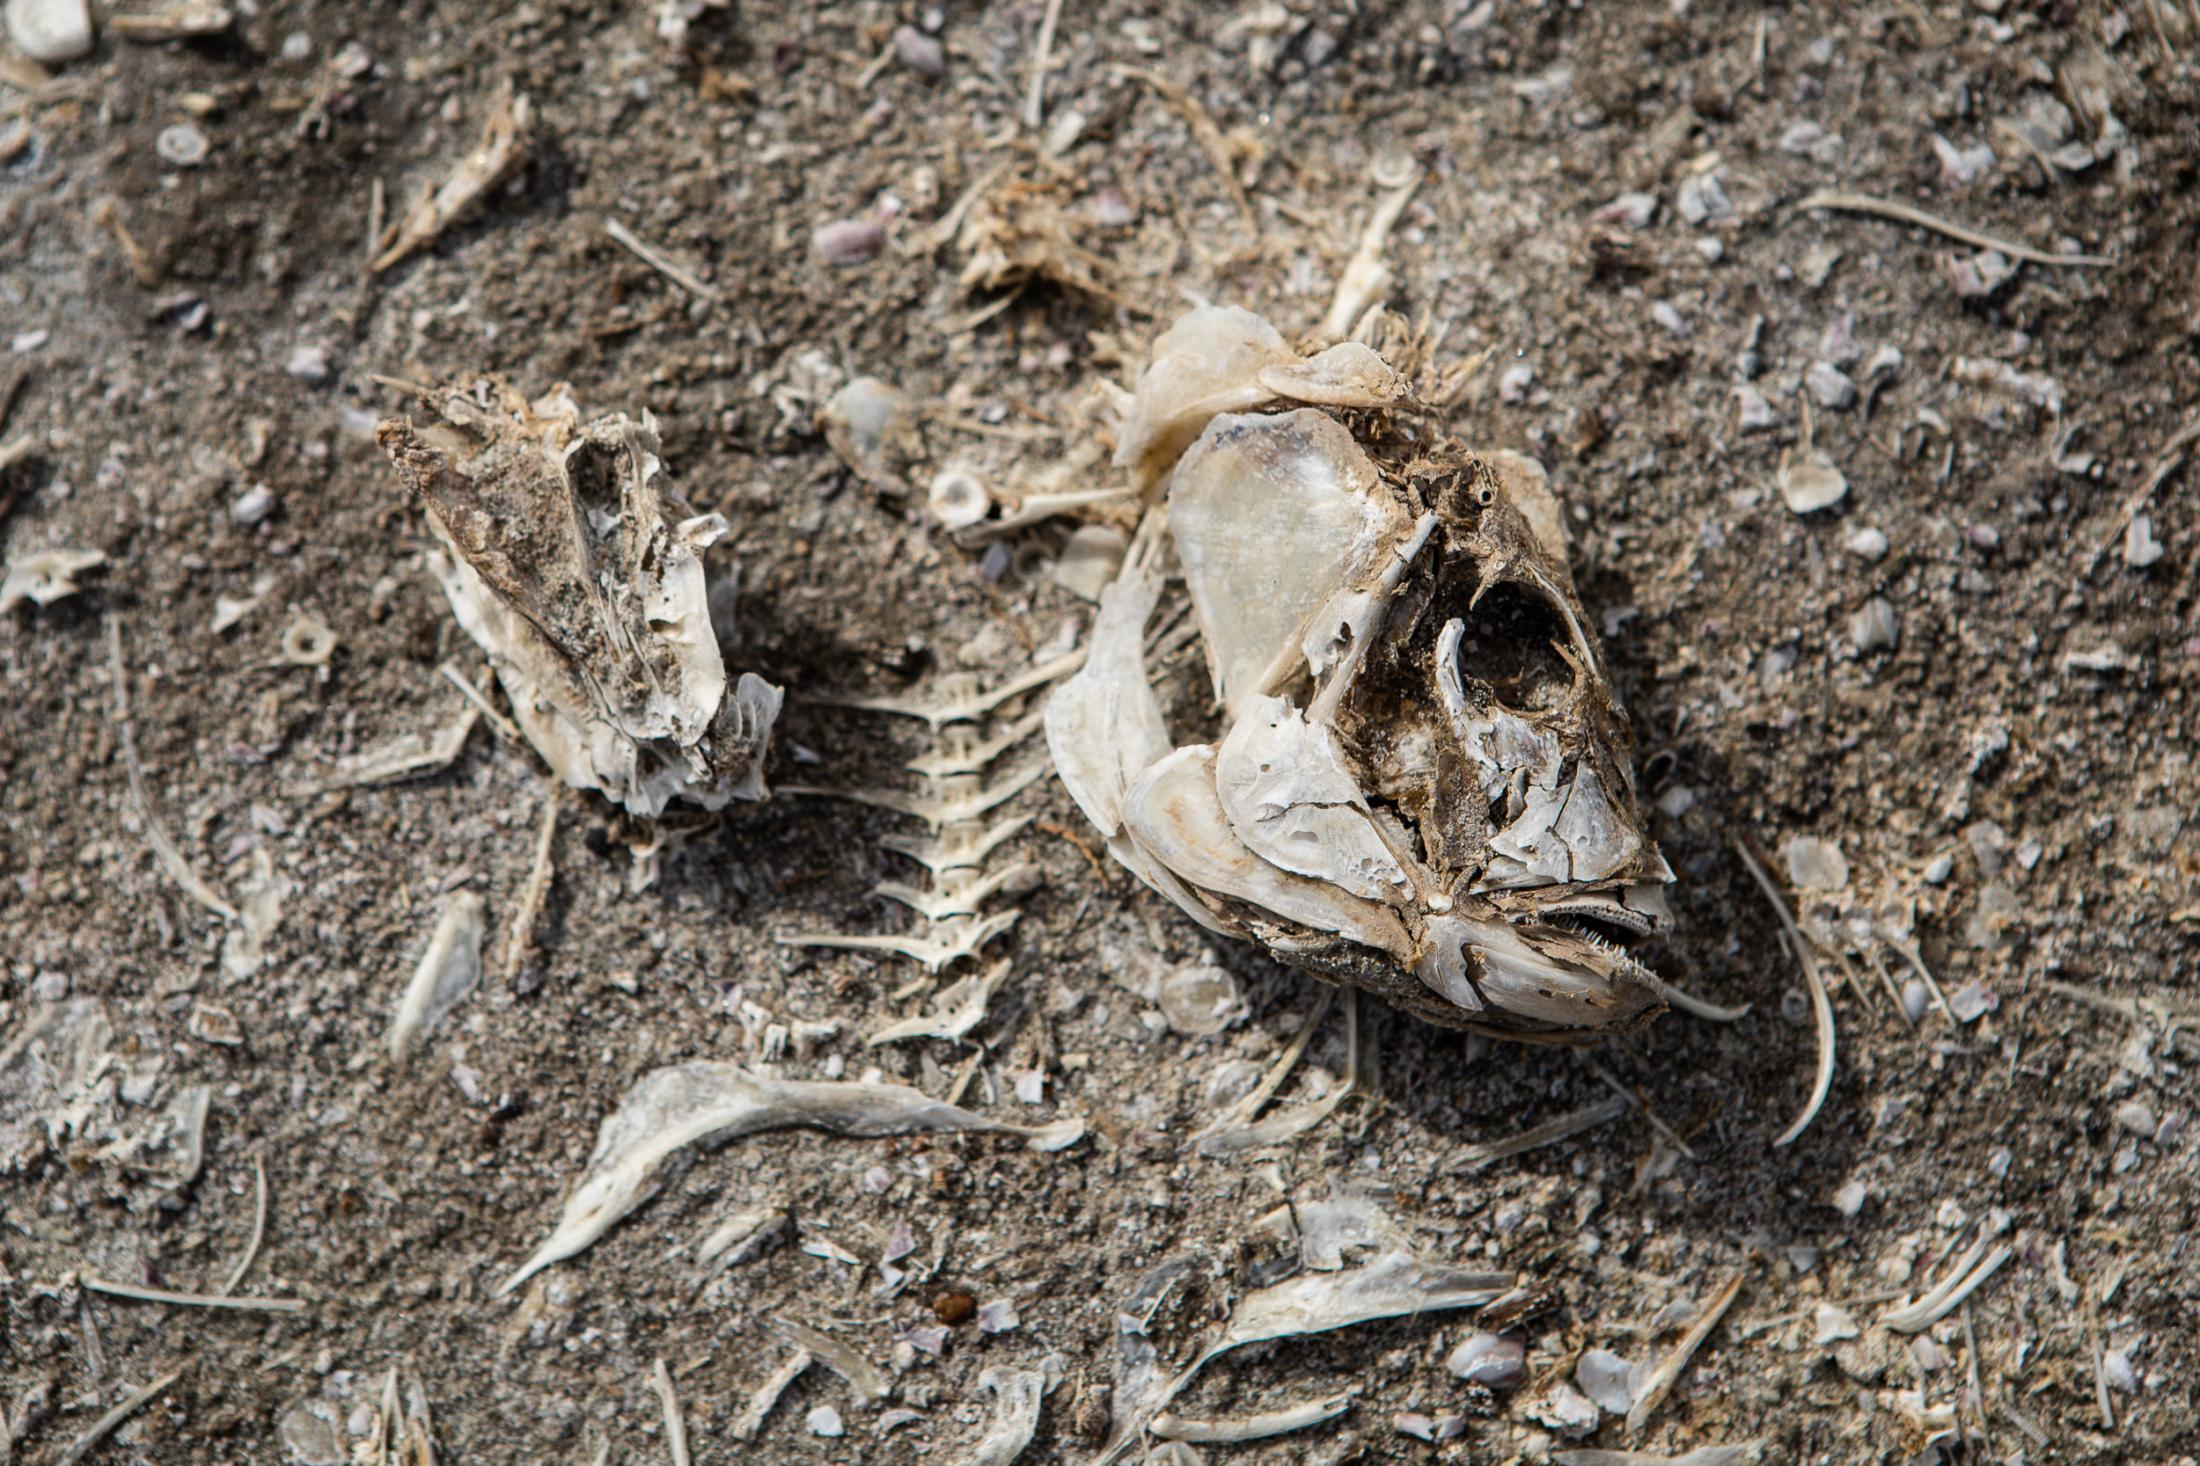  - The Salton Sea -  A Tilapia skeleton lays as a reminder of the huge die...